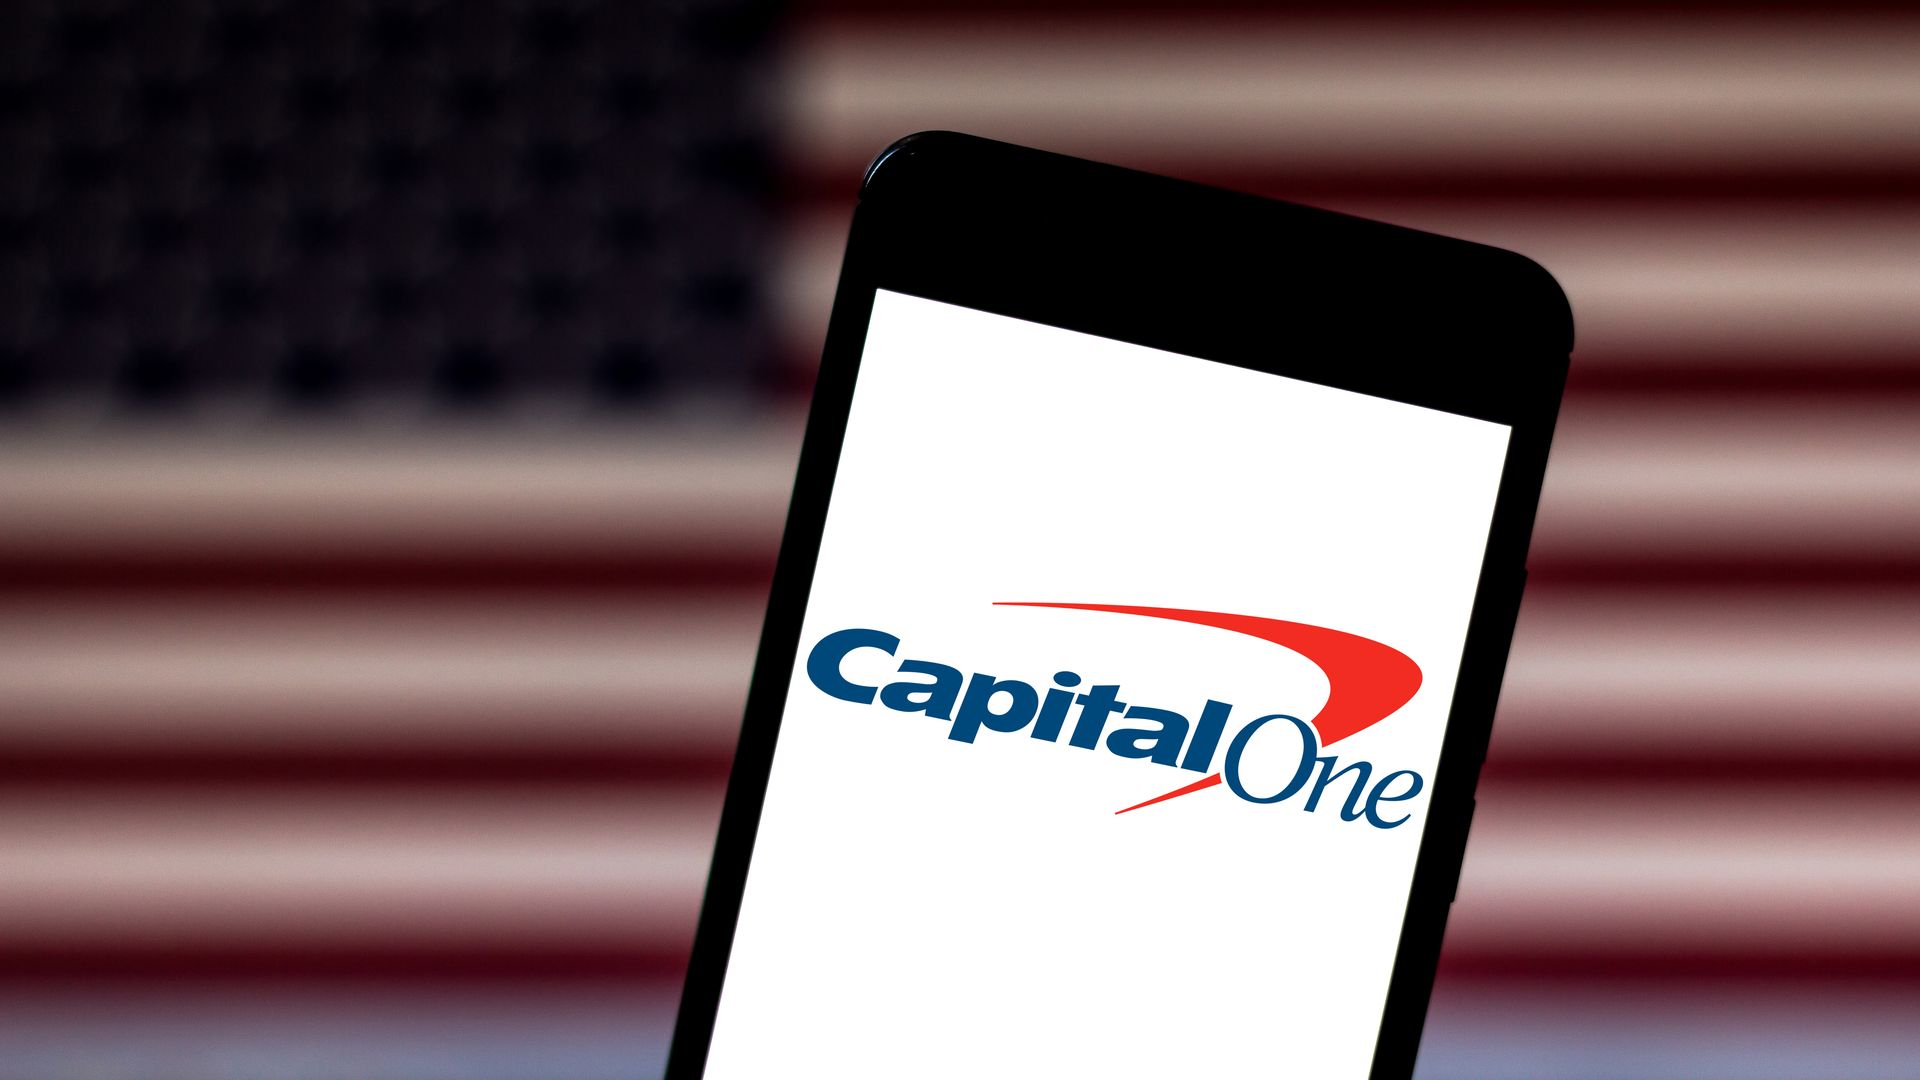 Capital One's logo displayed on a phone. 